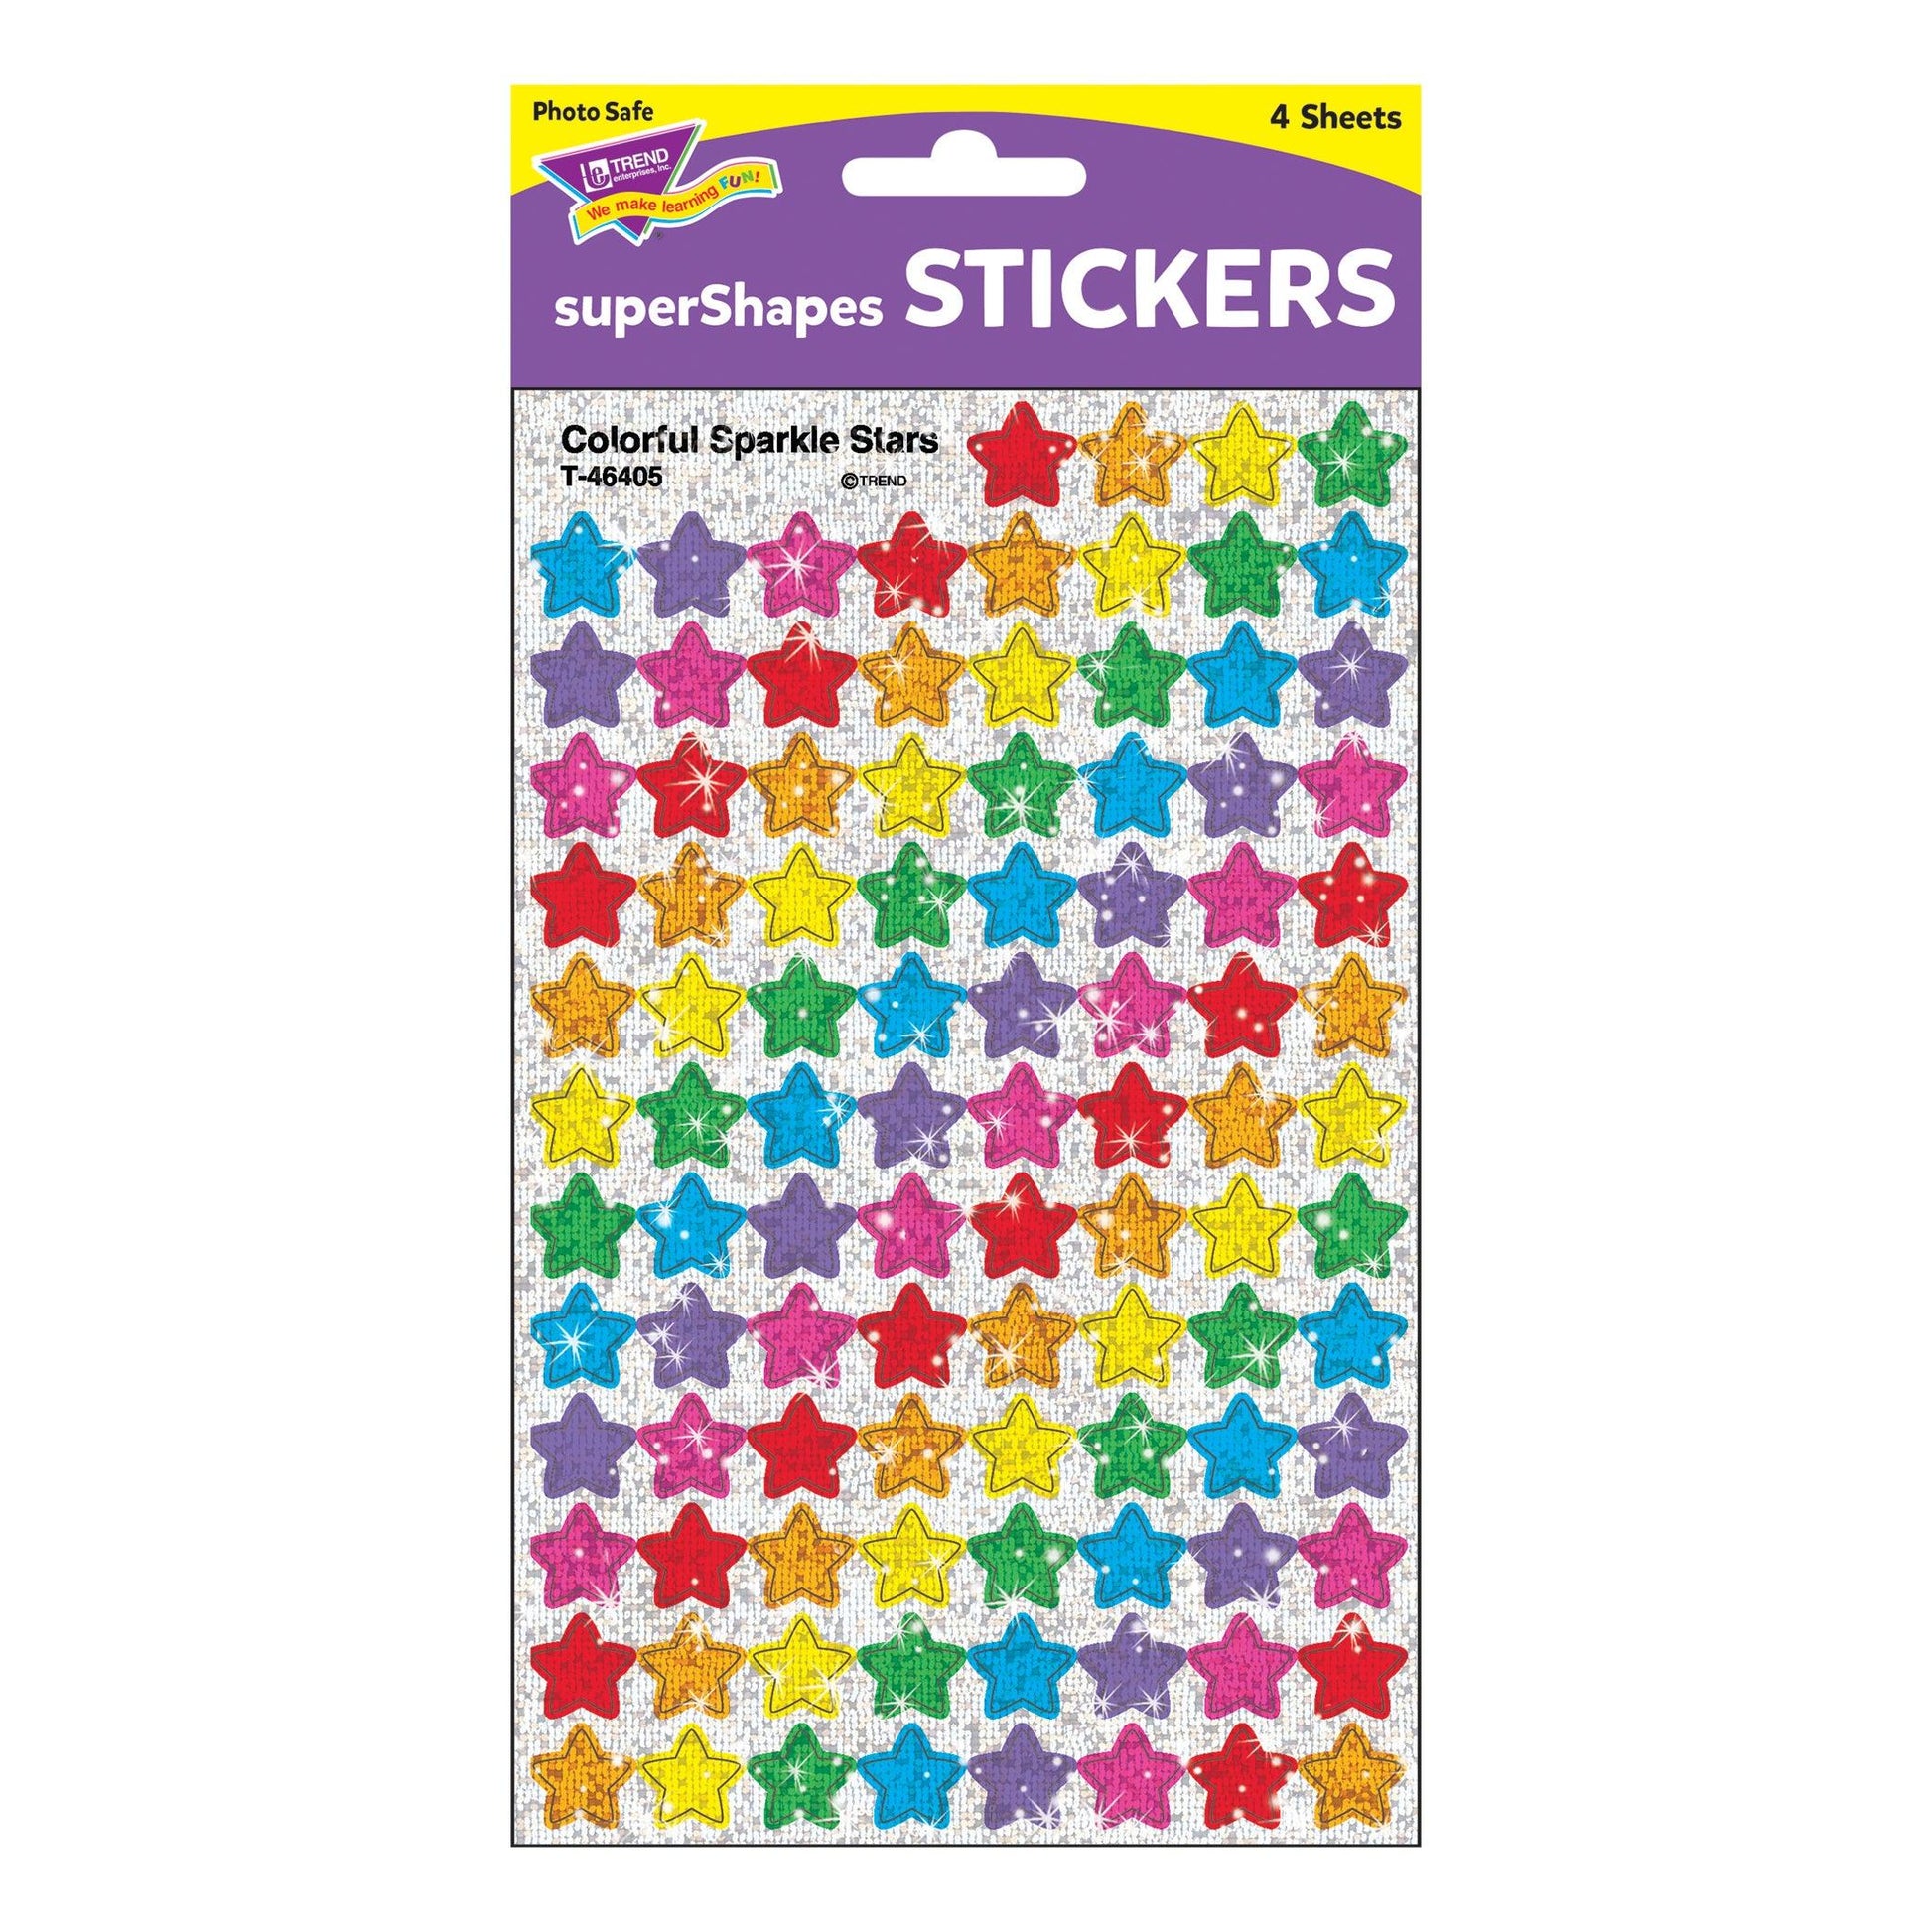 Colorful Sparkle Stars superShapes Stickers, 400 Per Pack, 6 Packs - Loomini